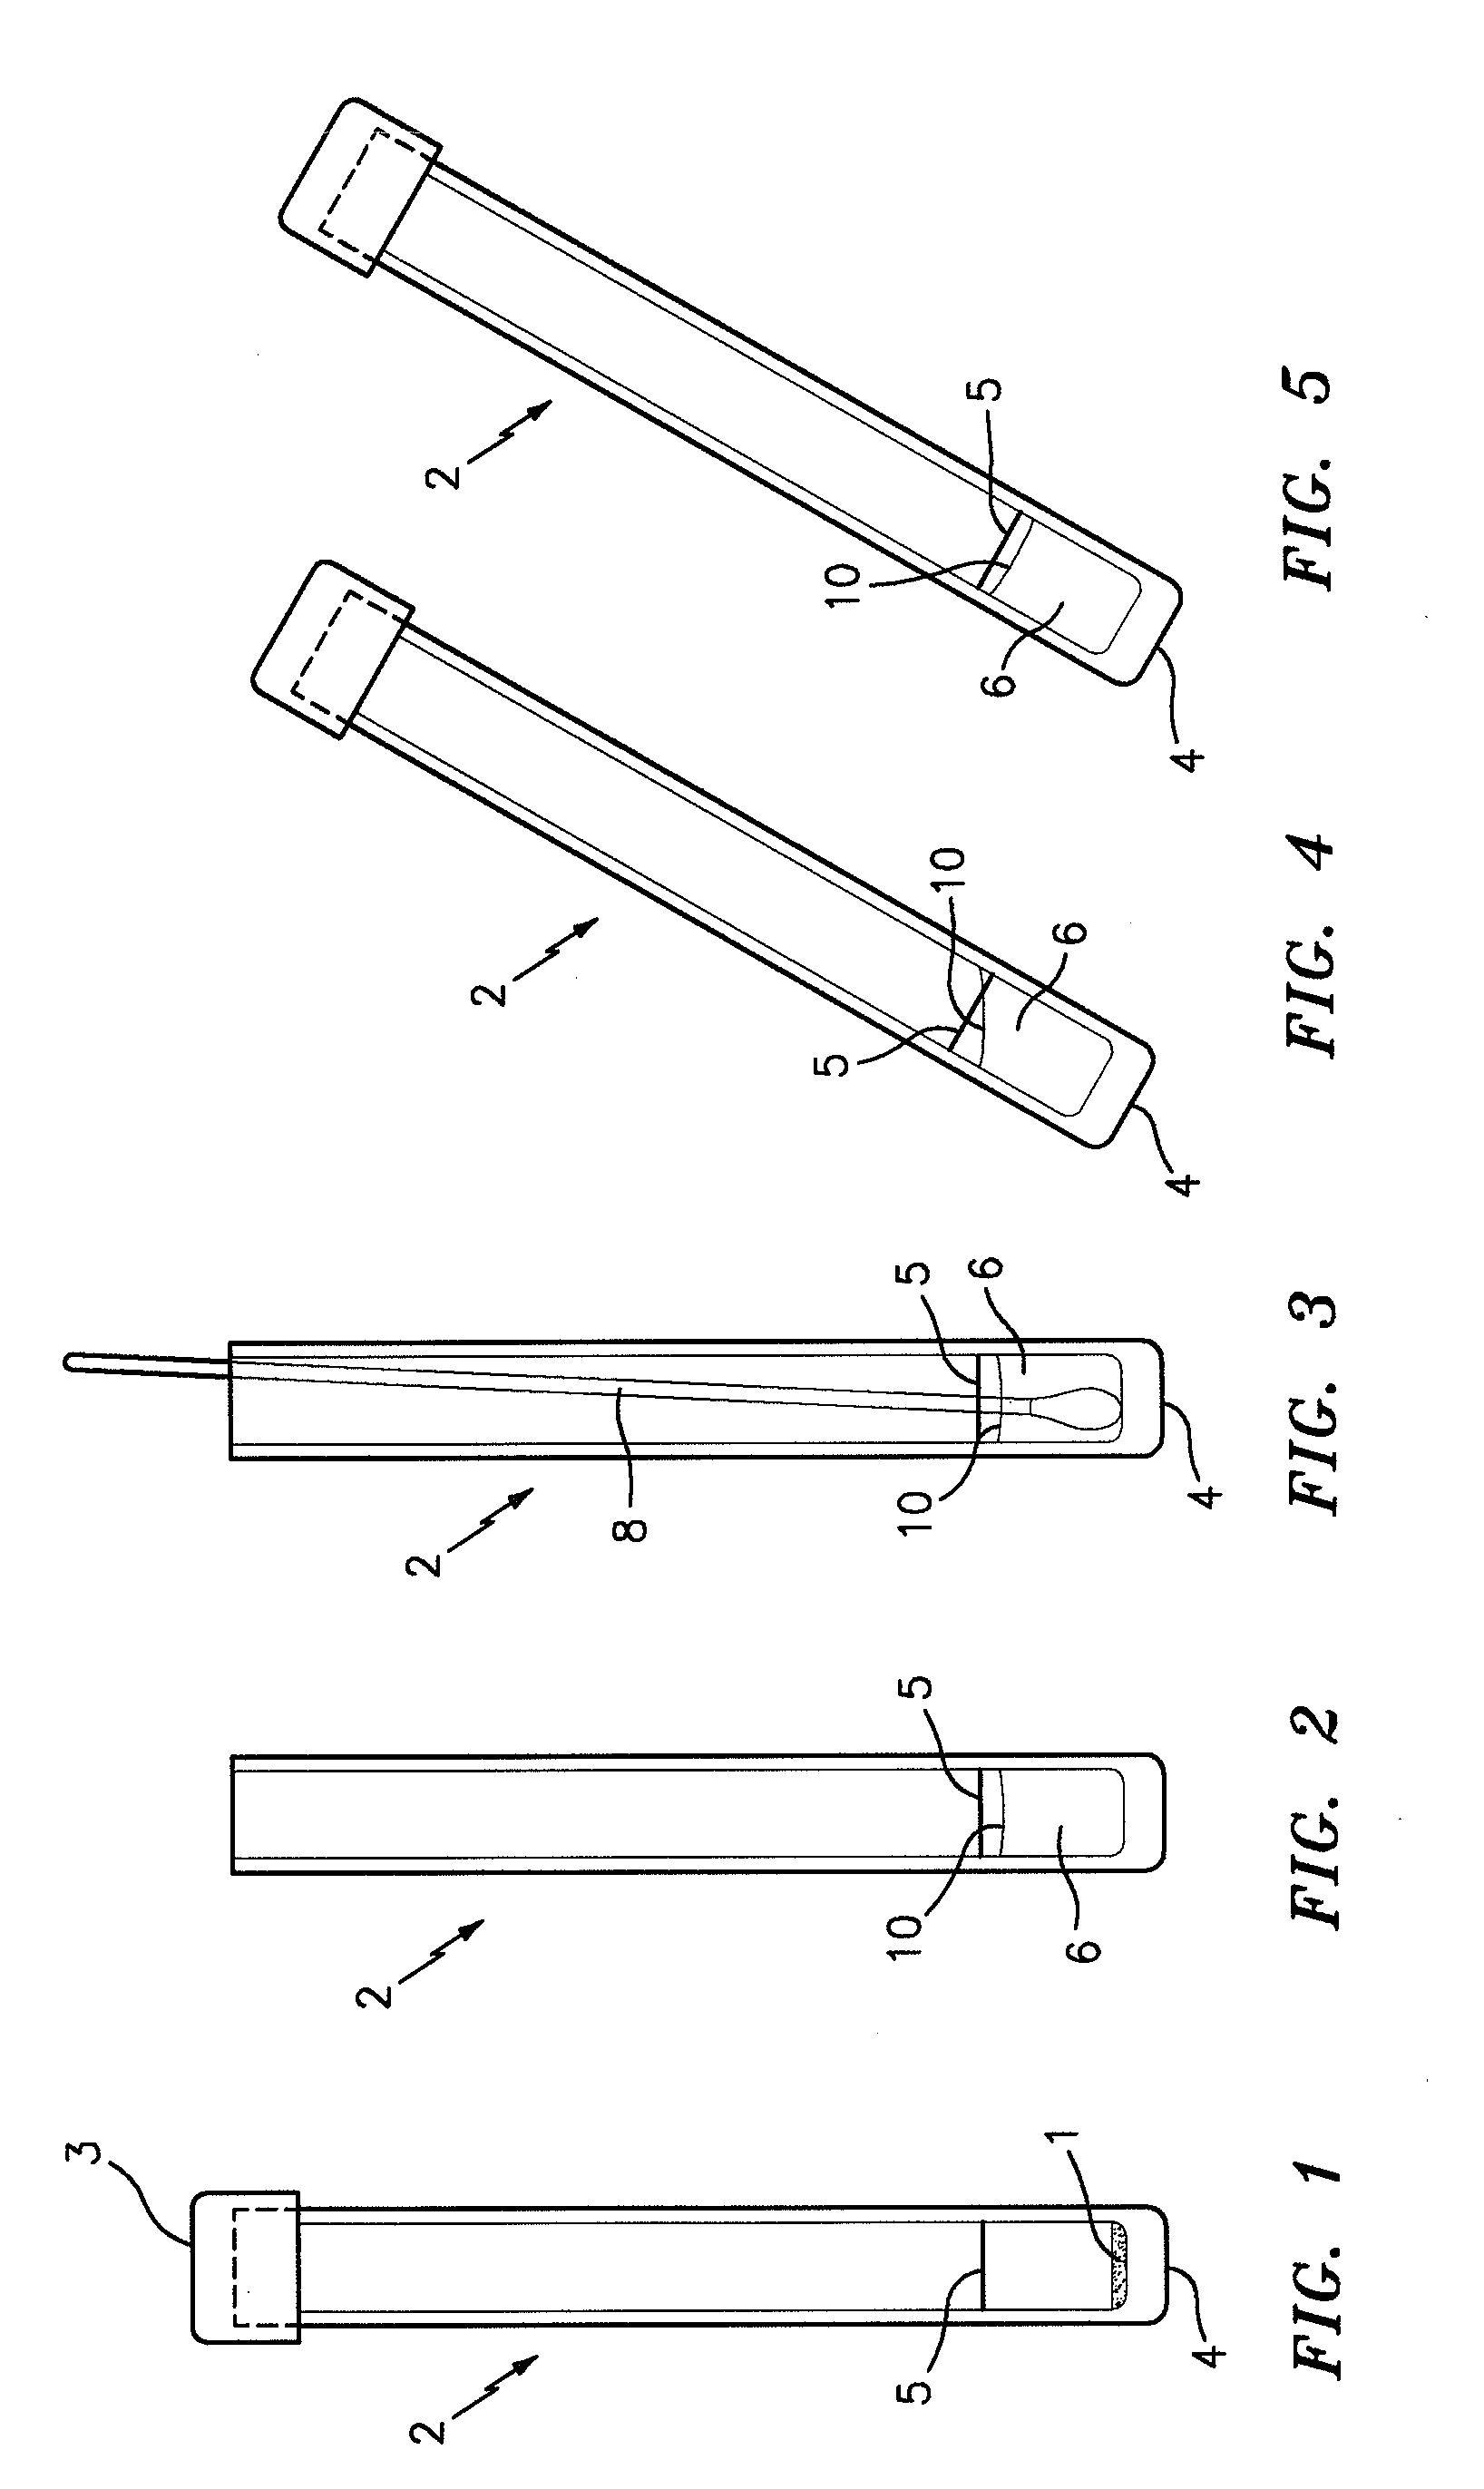 Method and medium for detecting the presence or absence of staphylococcus aureus in a test sample